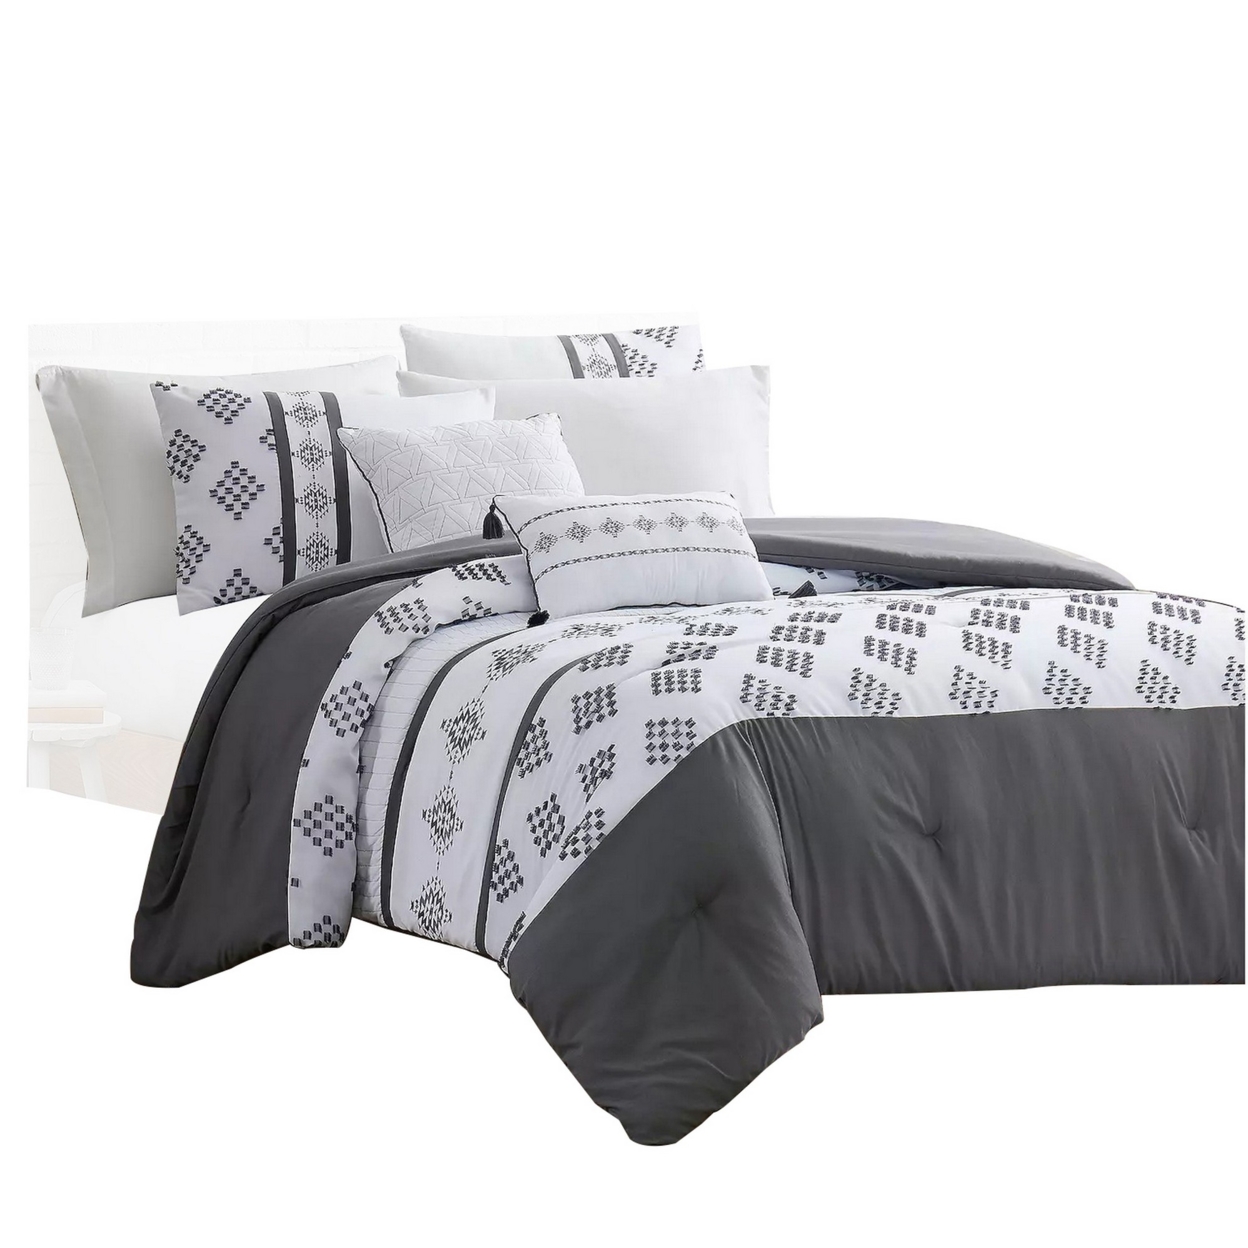 Ohio 5 Piece Queen Comforter Set With Geometric Prints, White And Gray By The Urban Port- Saltoro Sherpi